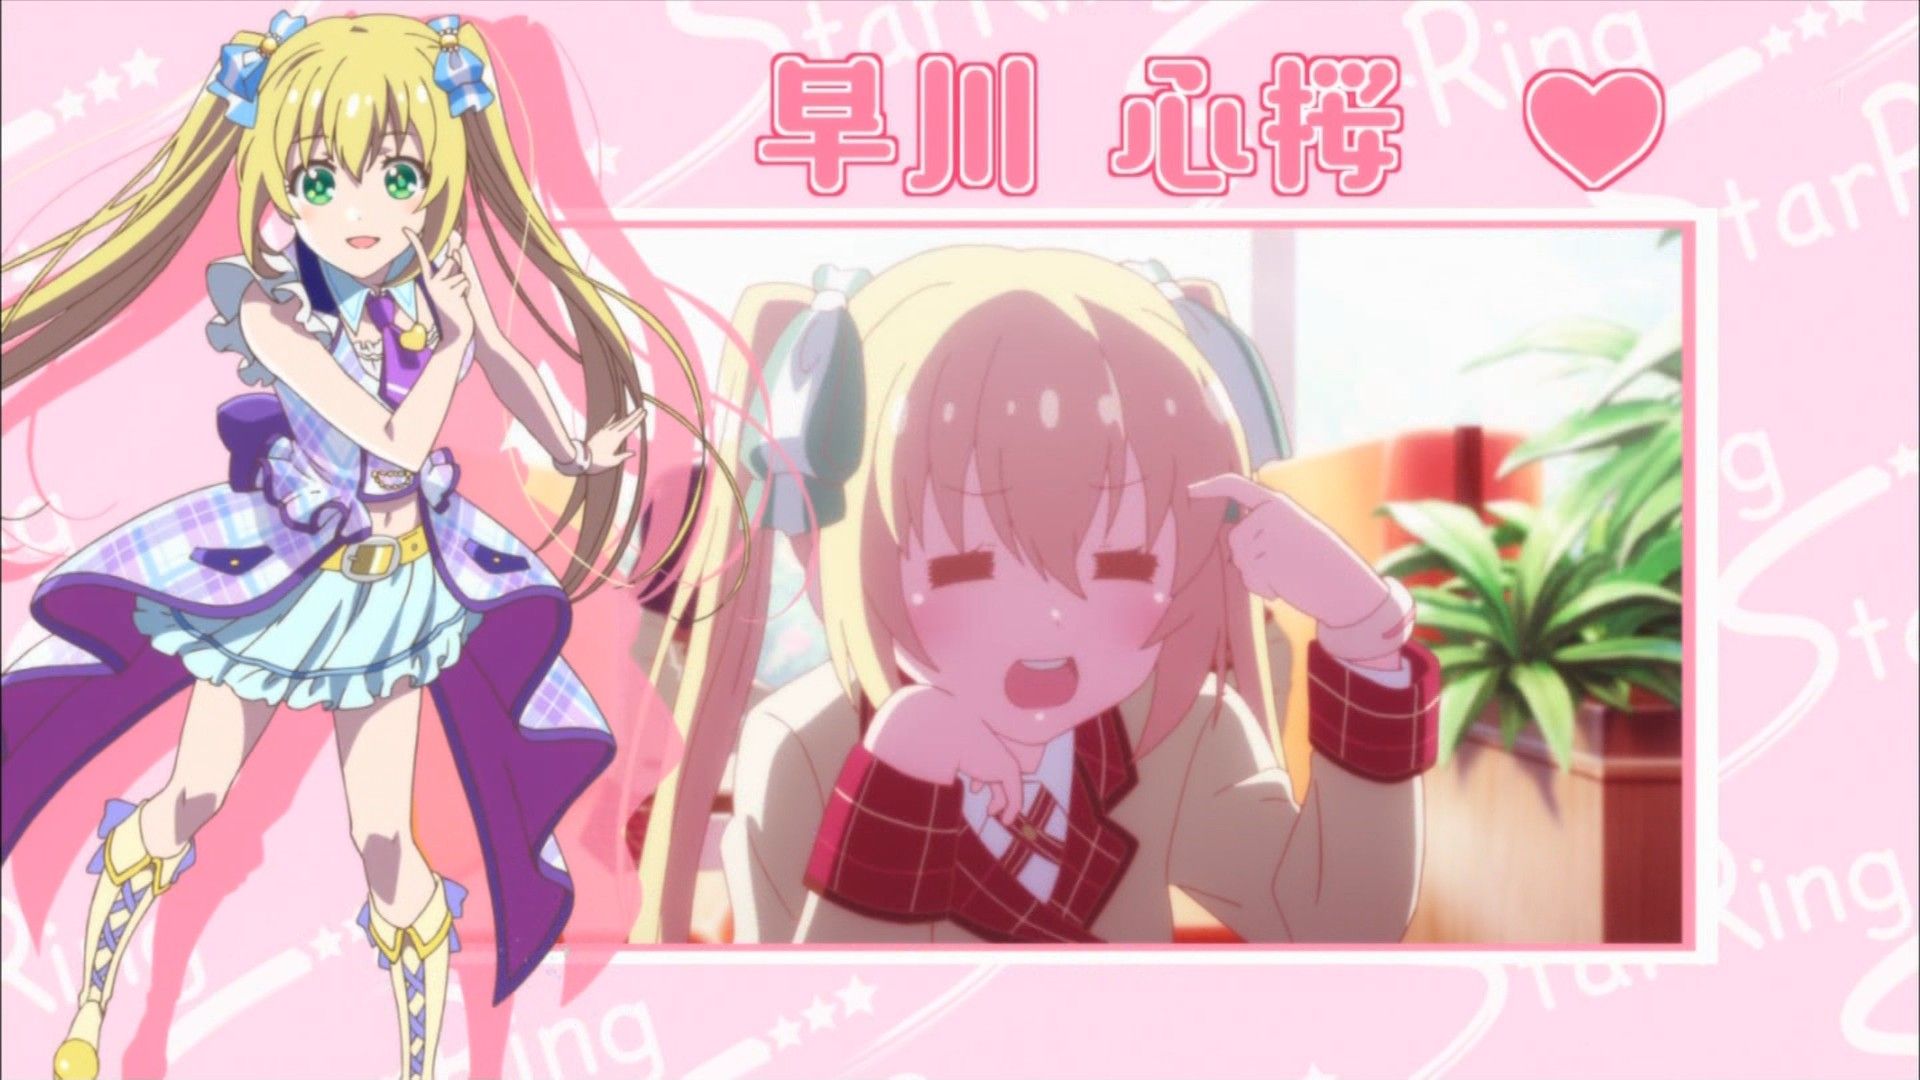 [Autumn anime] "Idol memories' story, suddenly became real part starting www wwwwww 4